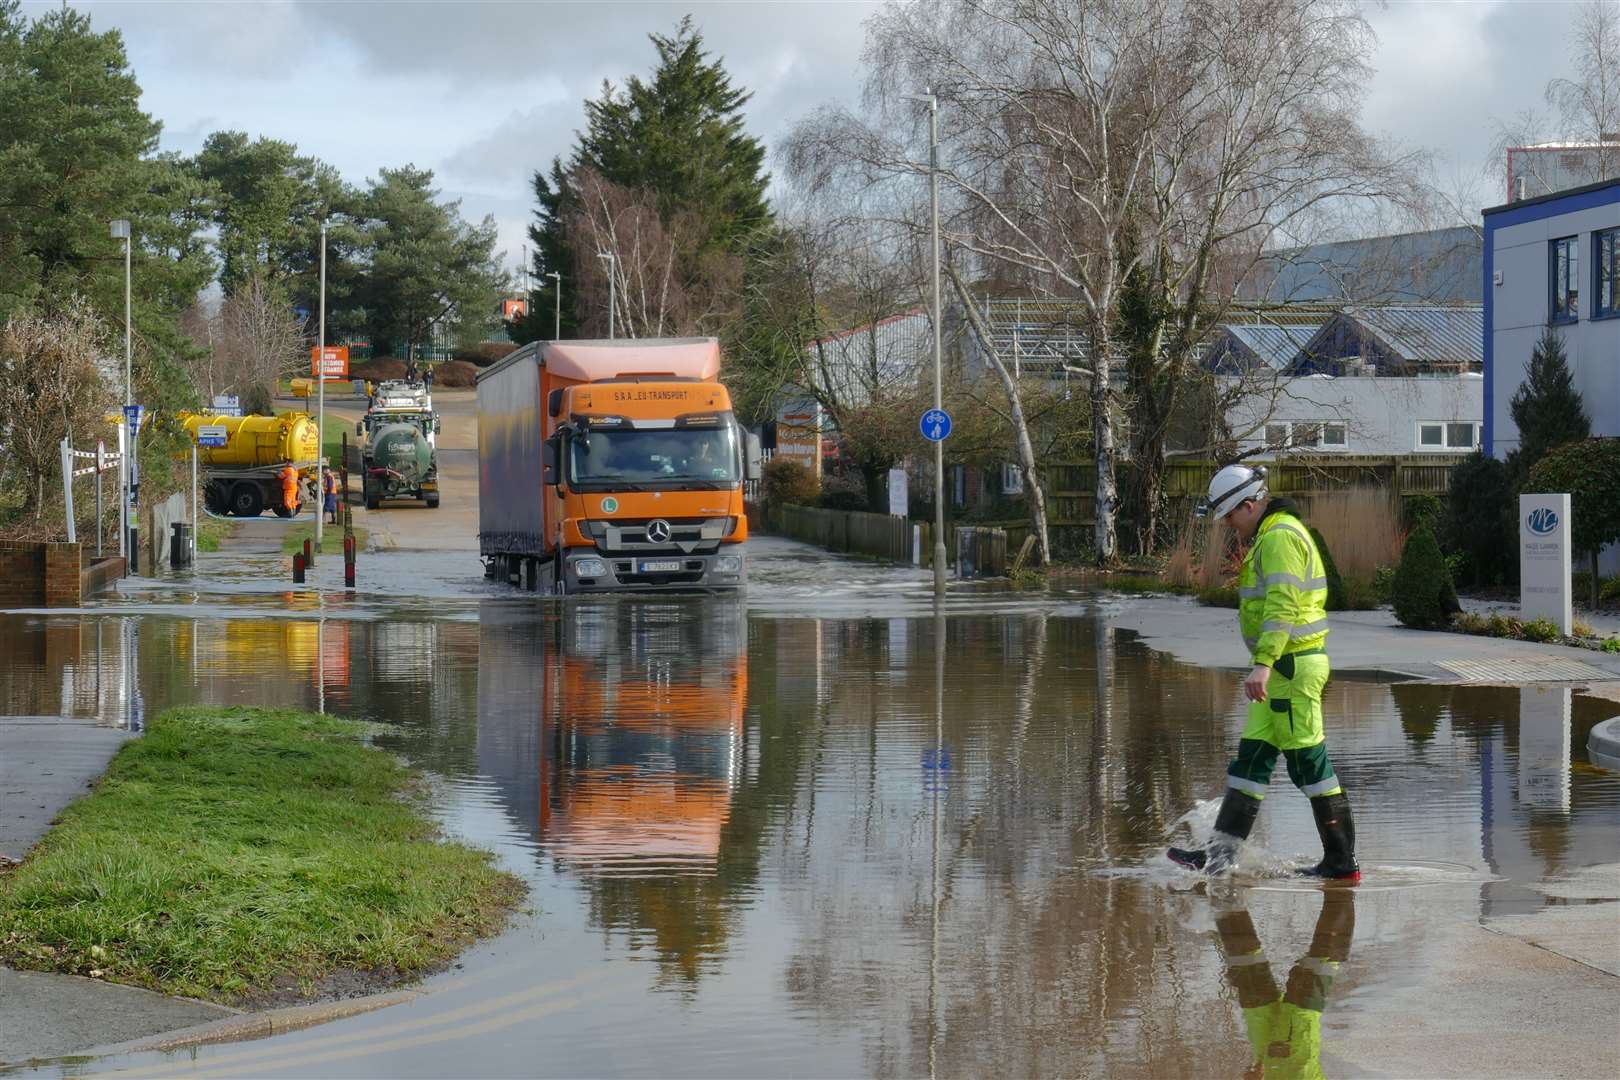 Only large vehicles including HGVs have been able to get through the water. Picture: Andy Clark